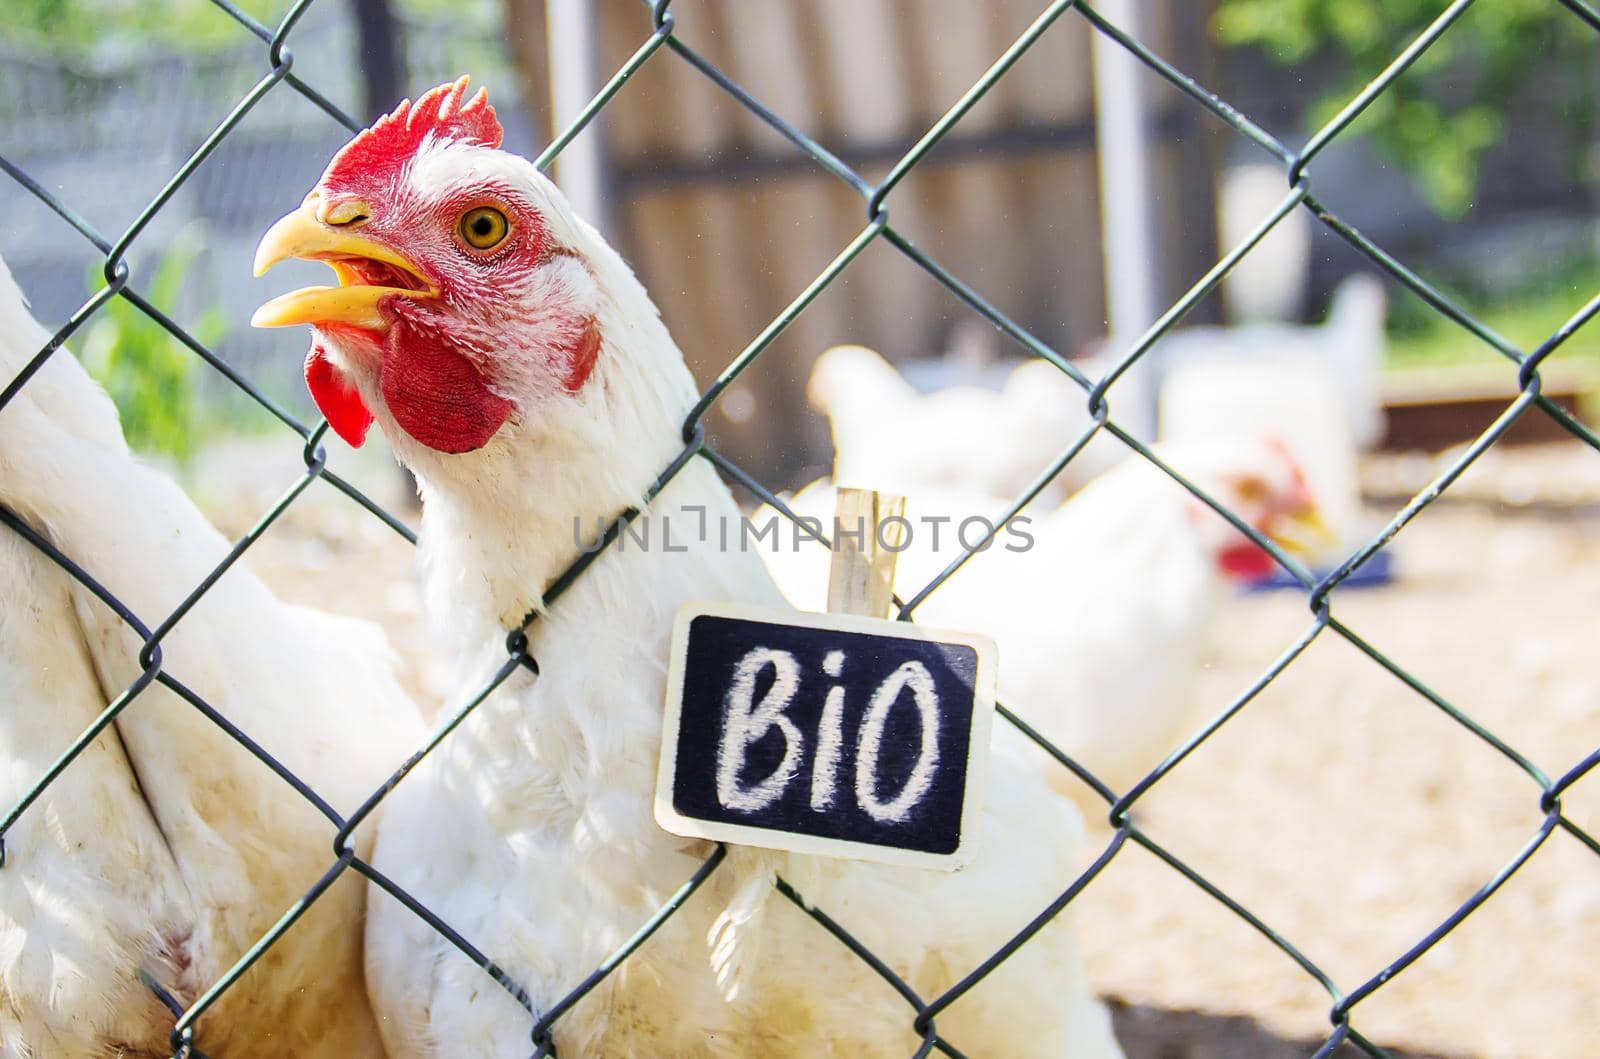 Bio chickens on a home farm. Selective focus.